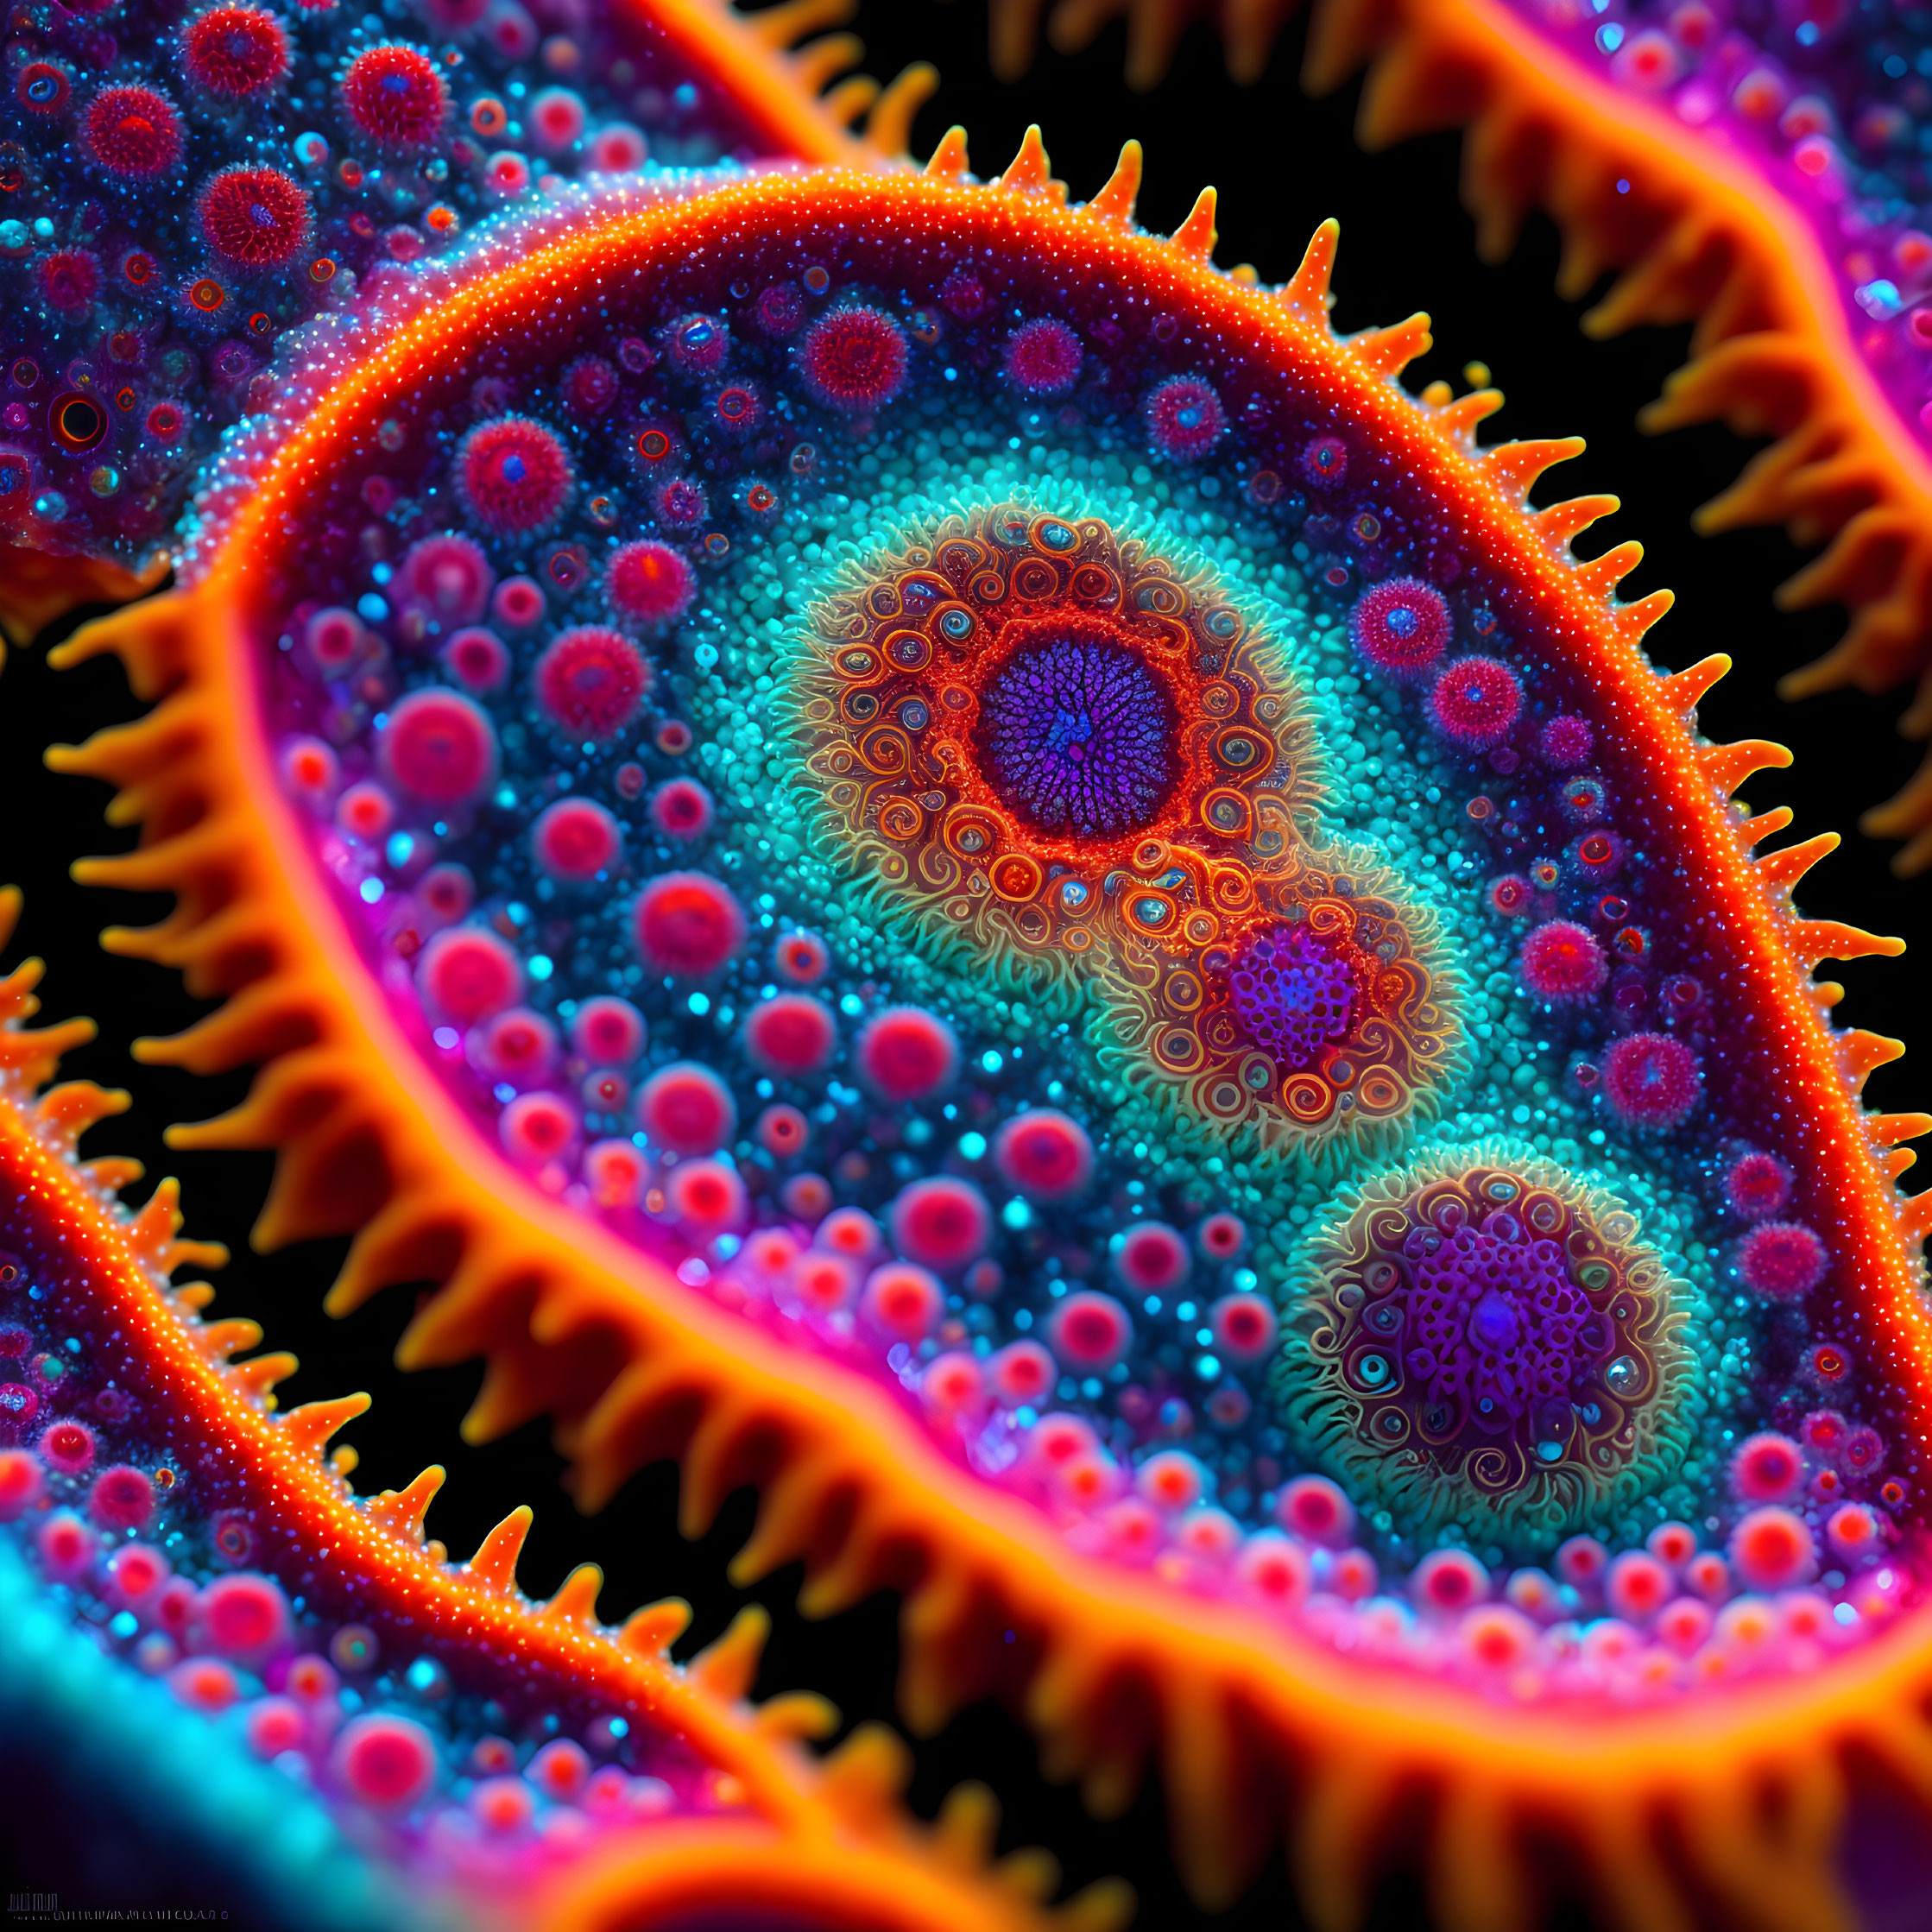 Colorful Close-Up Fractal Pattern with Circular and Spiked Designs